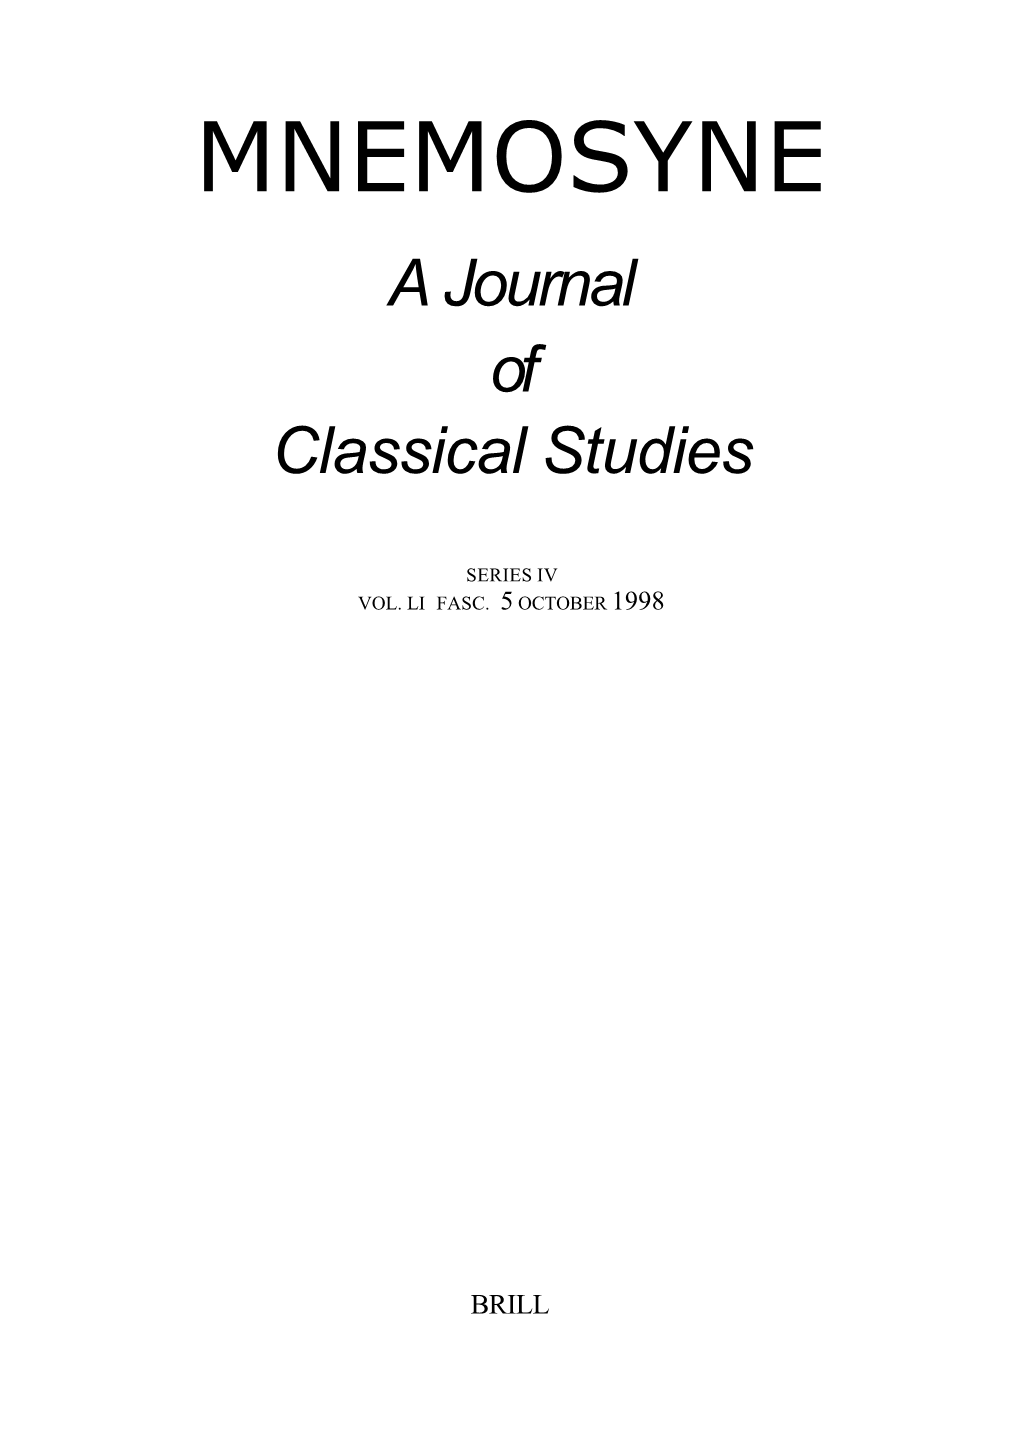 MNEMOSYNE a Journal of Classical Studies